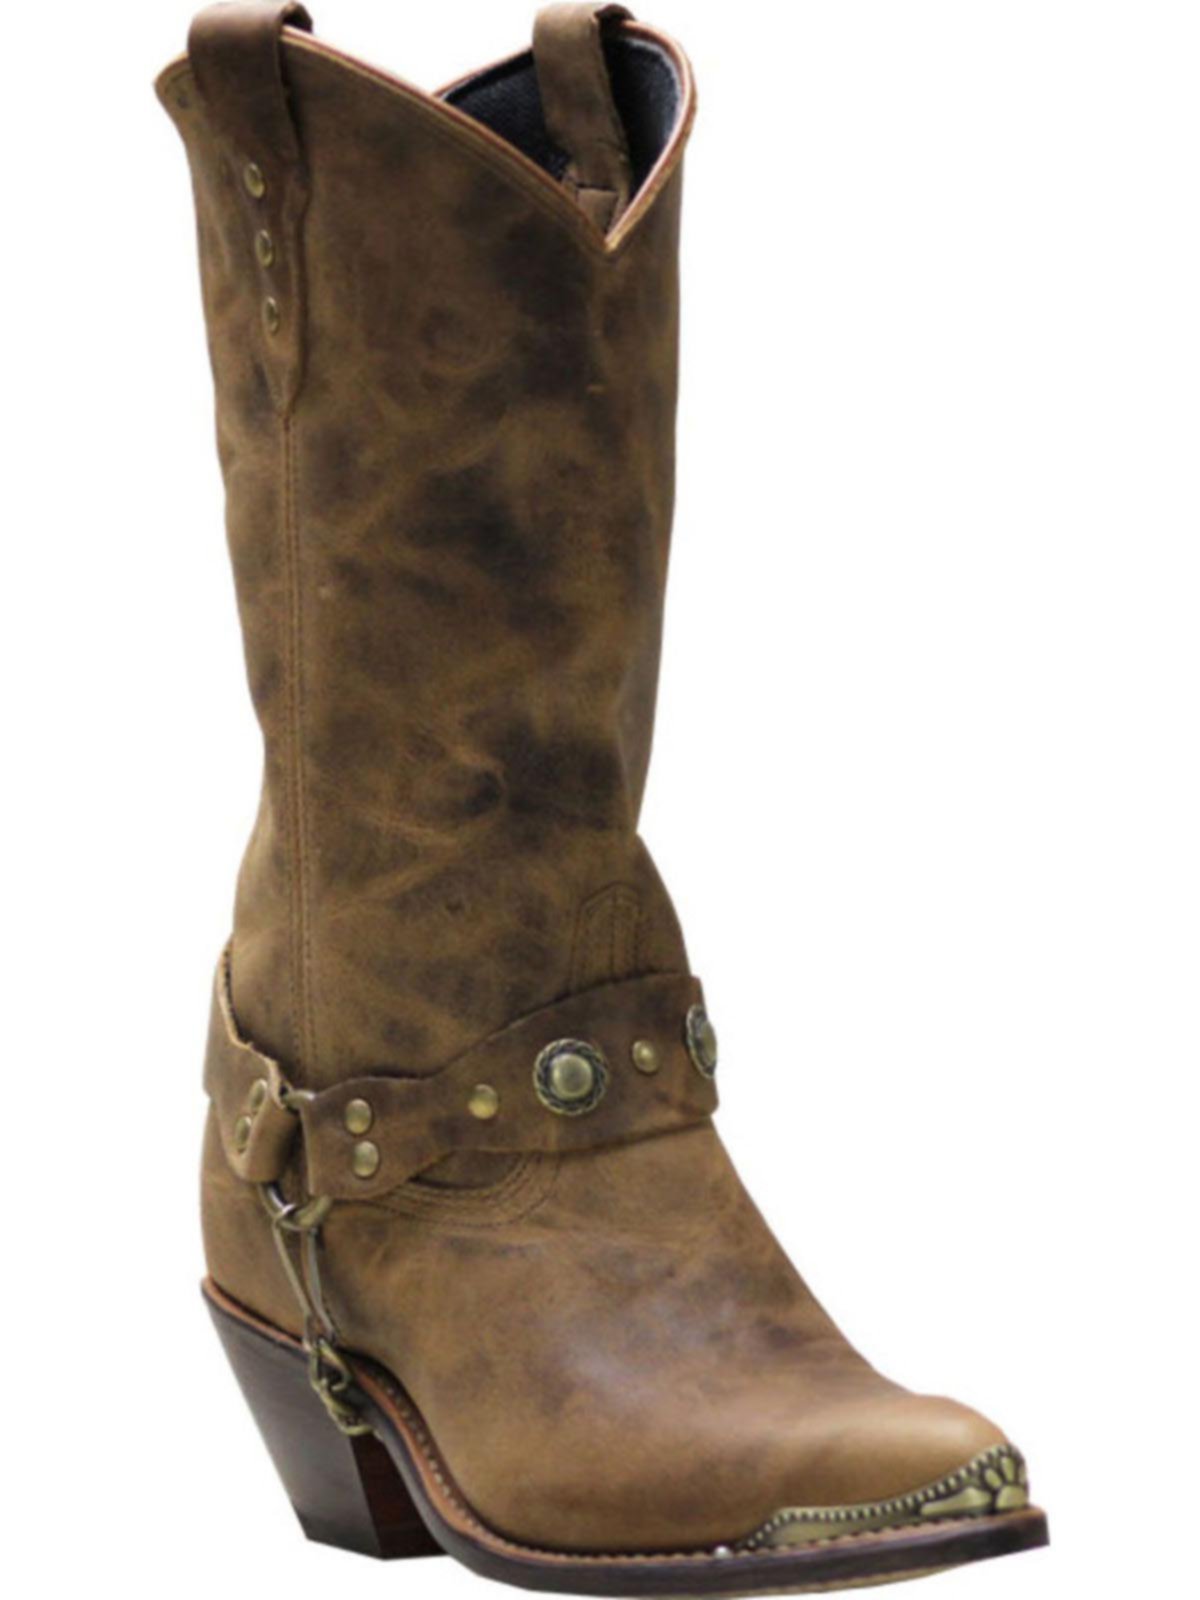 Shop Sage Womens Western Boot 4528 | Save 20% + Free Shipping | BootAmerica